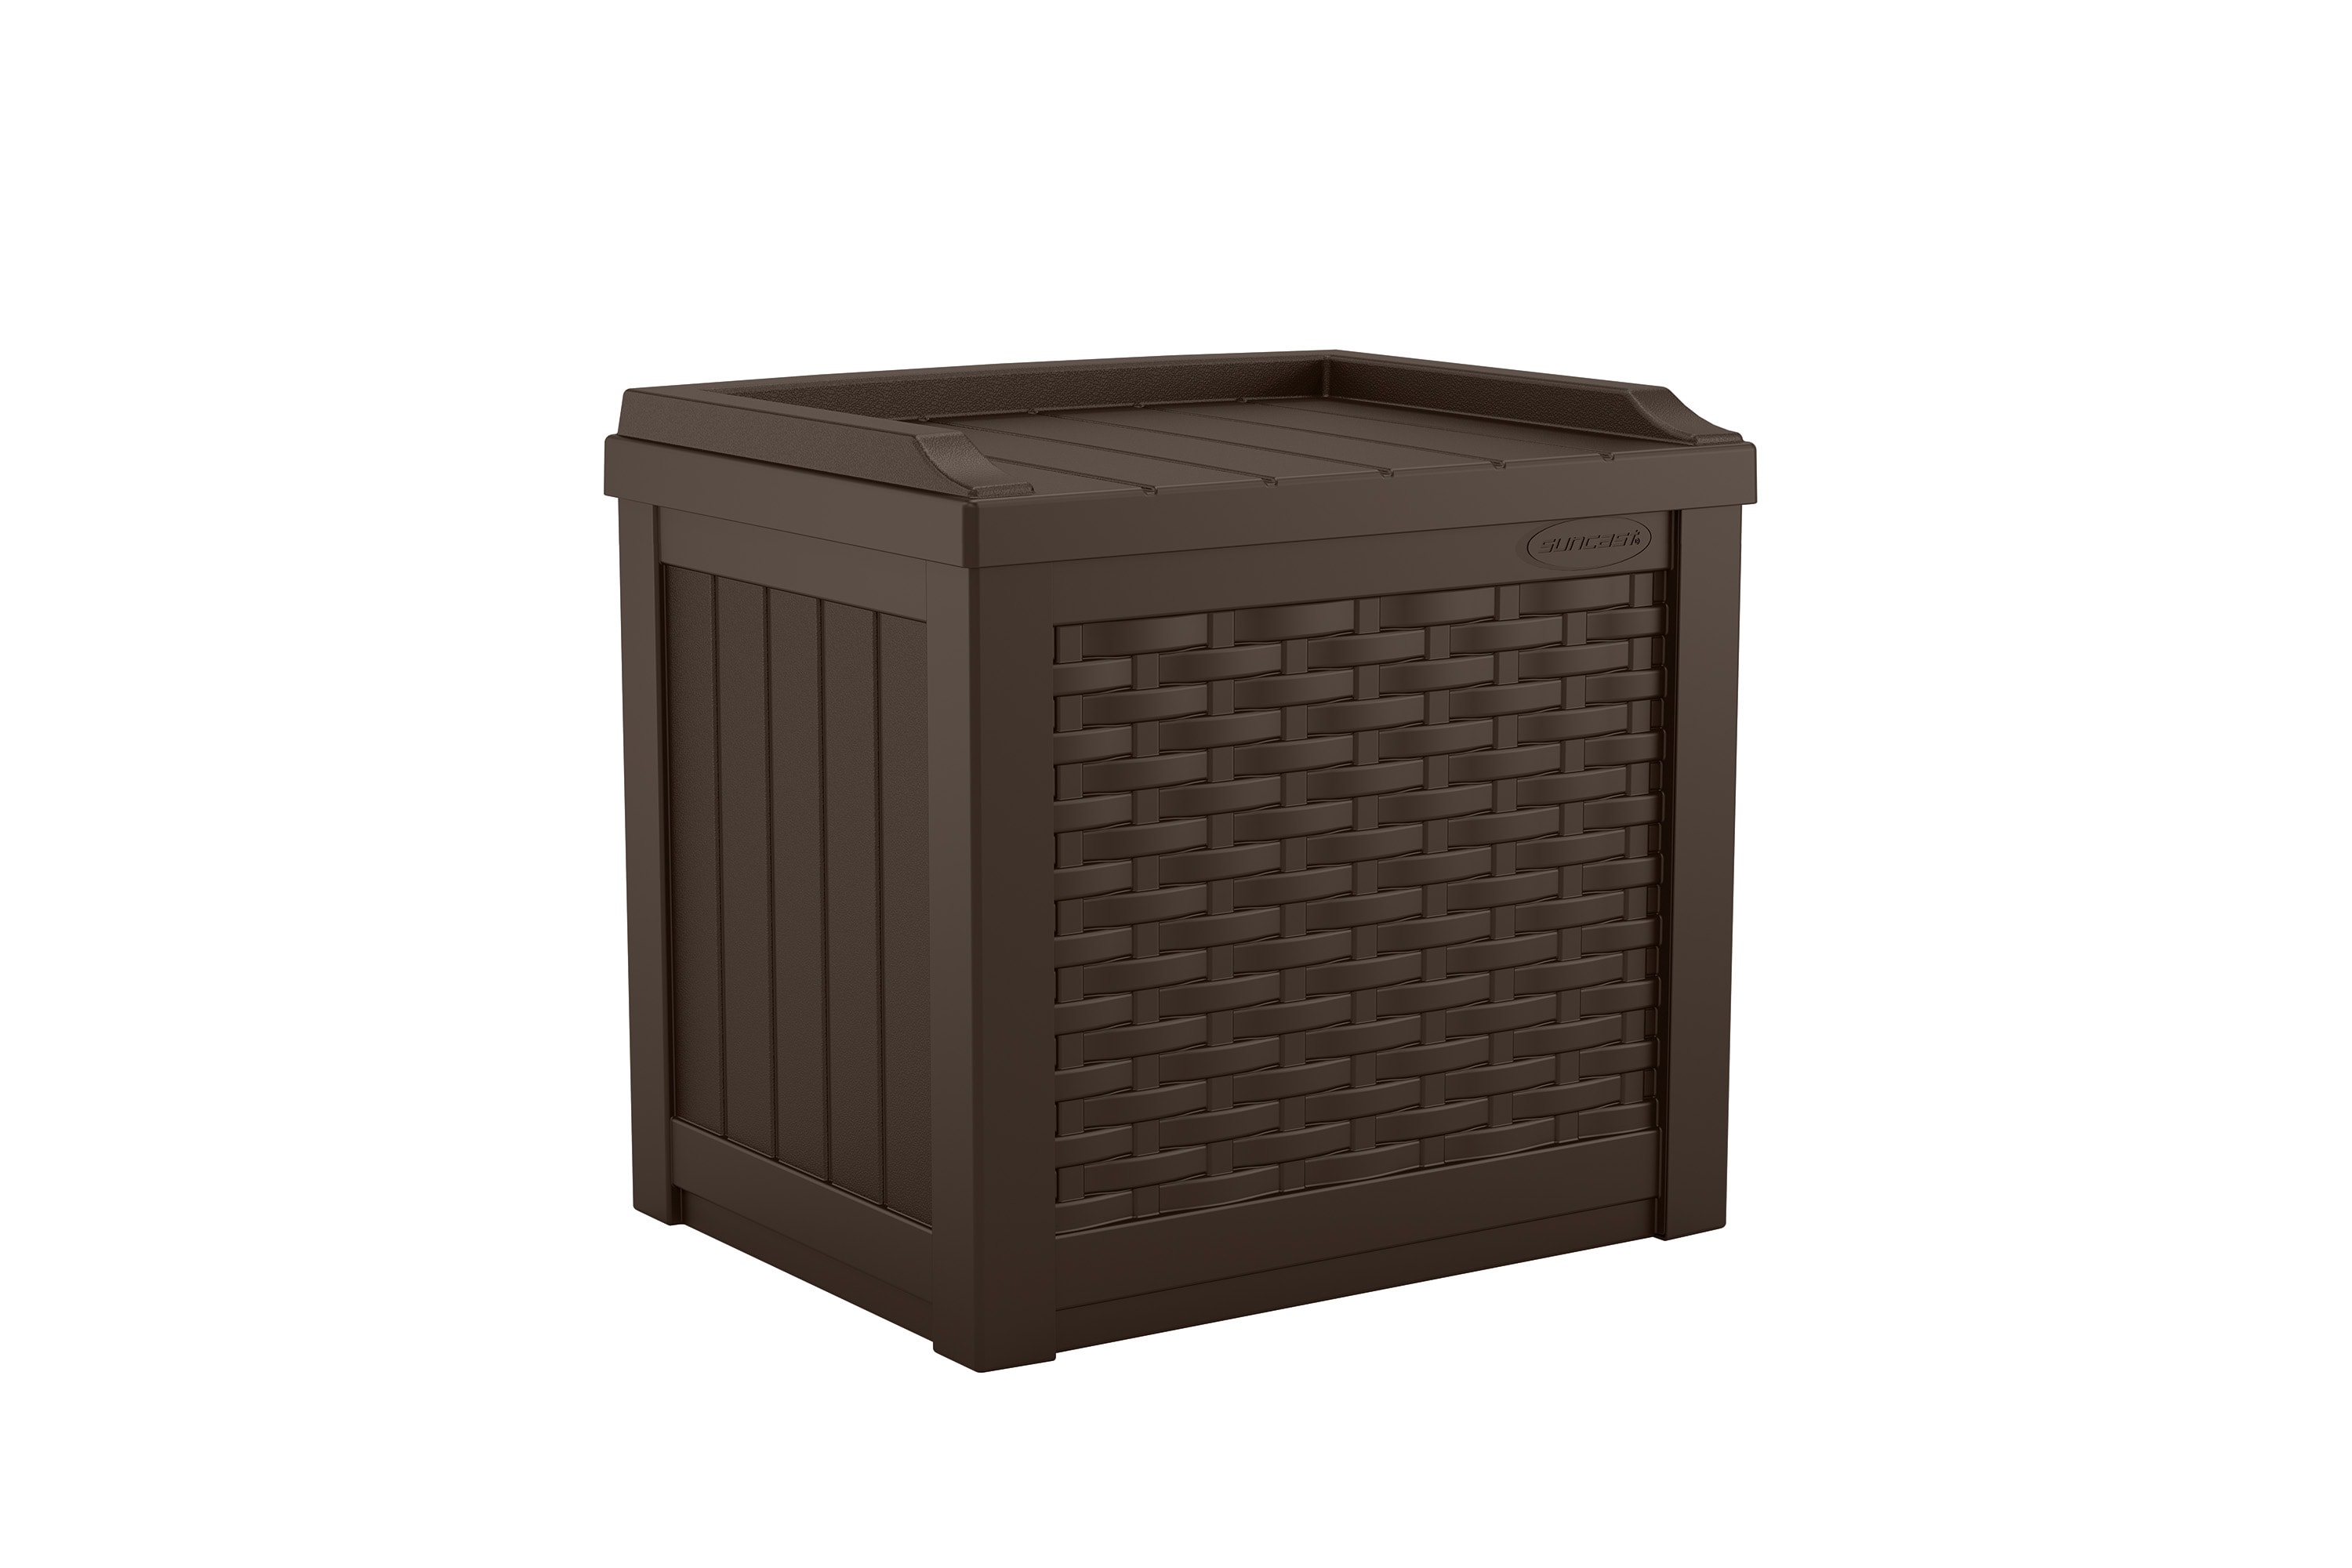 Suncast 73 Gallon Resin Deck Box With Wheels, Taupe/Brown